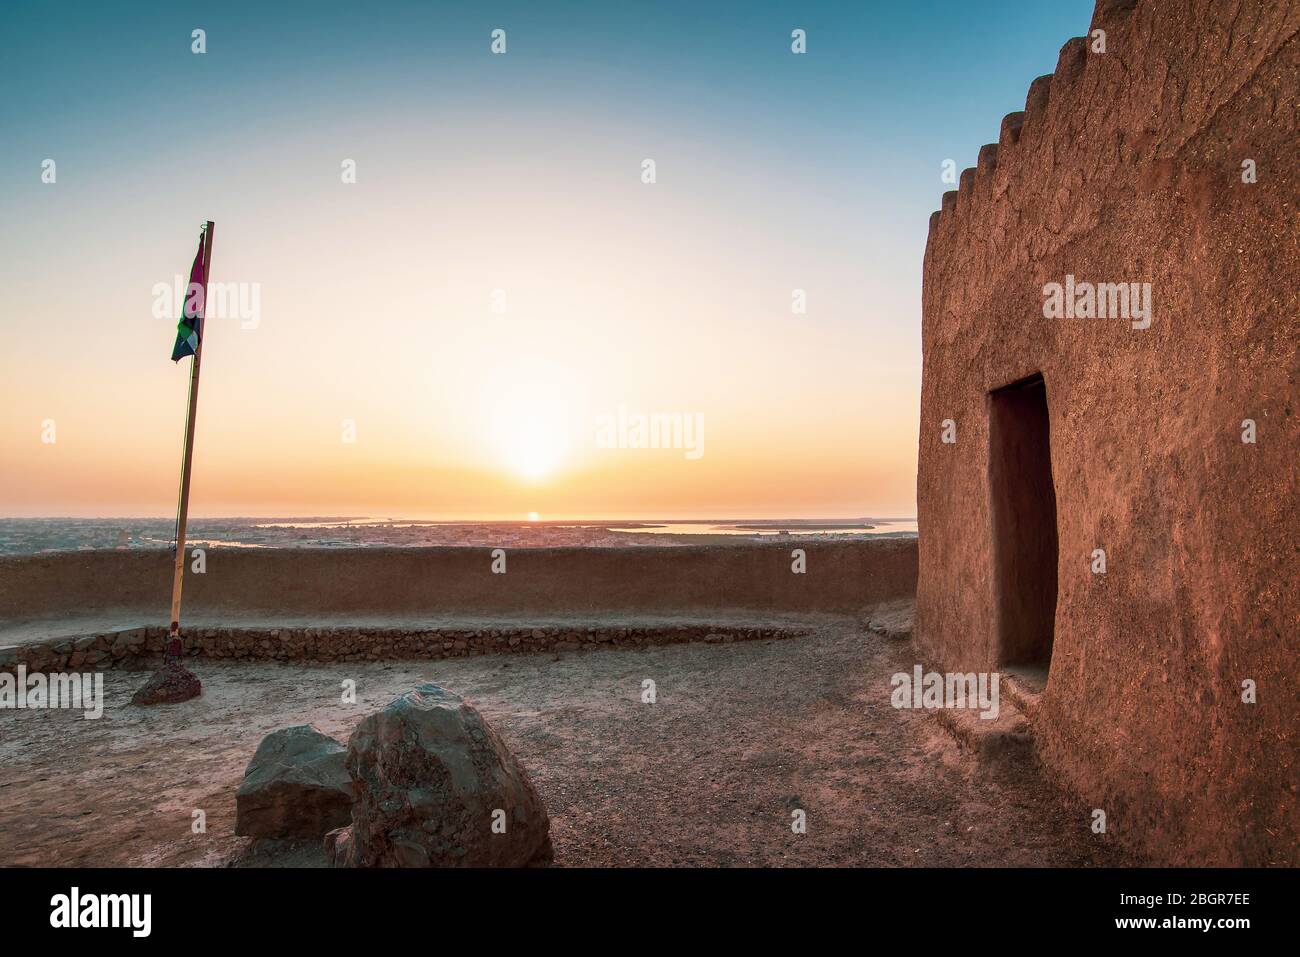 Dhayah Fort in north Ras Al Khaimah United Arab Emirates. Gulf, heritage architecture at sunset Stock Photo